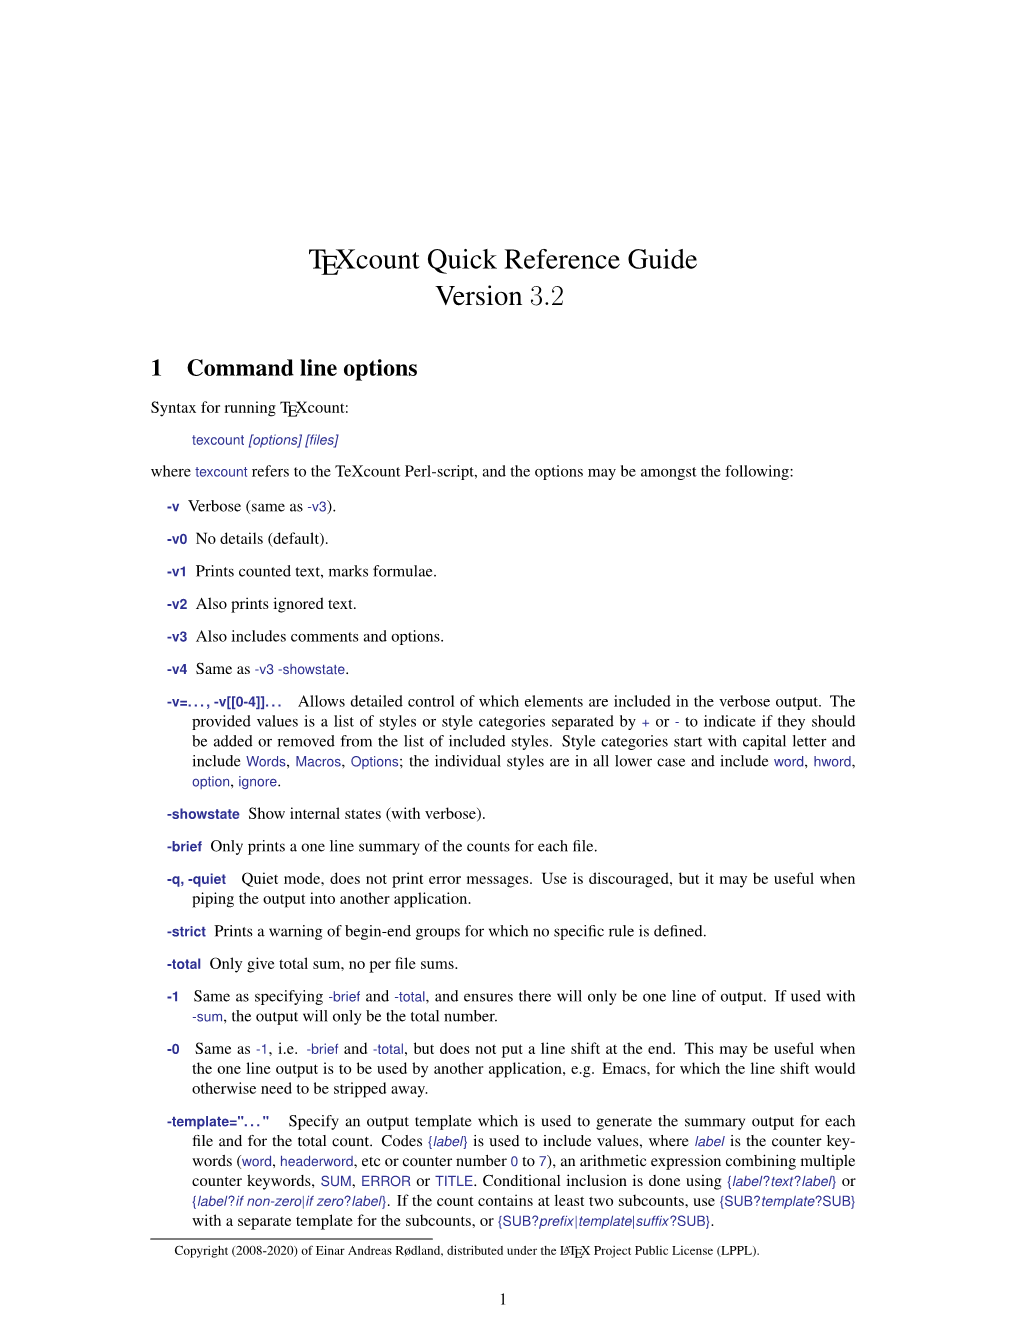 Texcount Quick Reference Guide Version 3.2